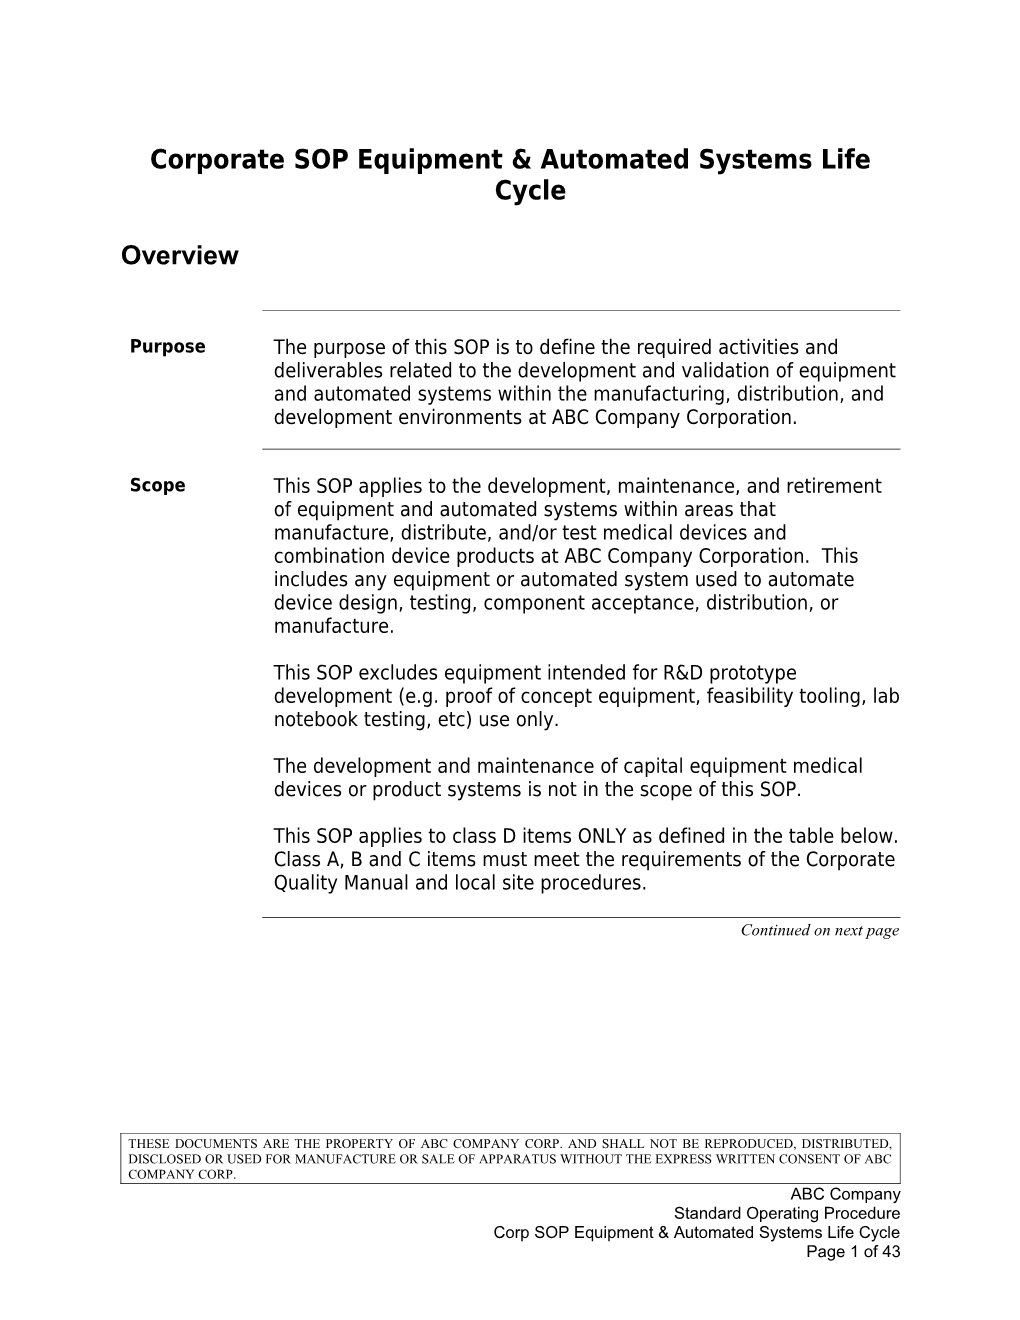 Corporate SOP Equipment & Automated Systems Life Cycle